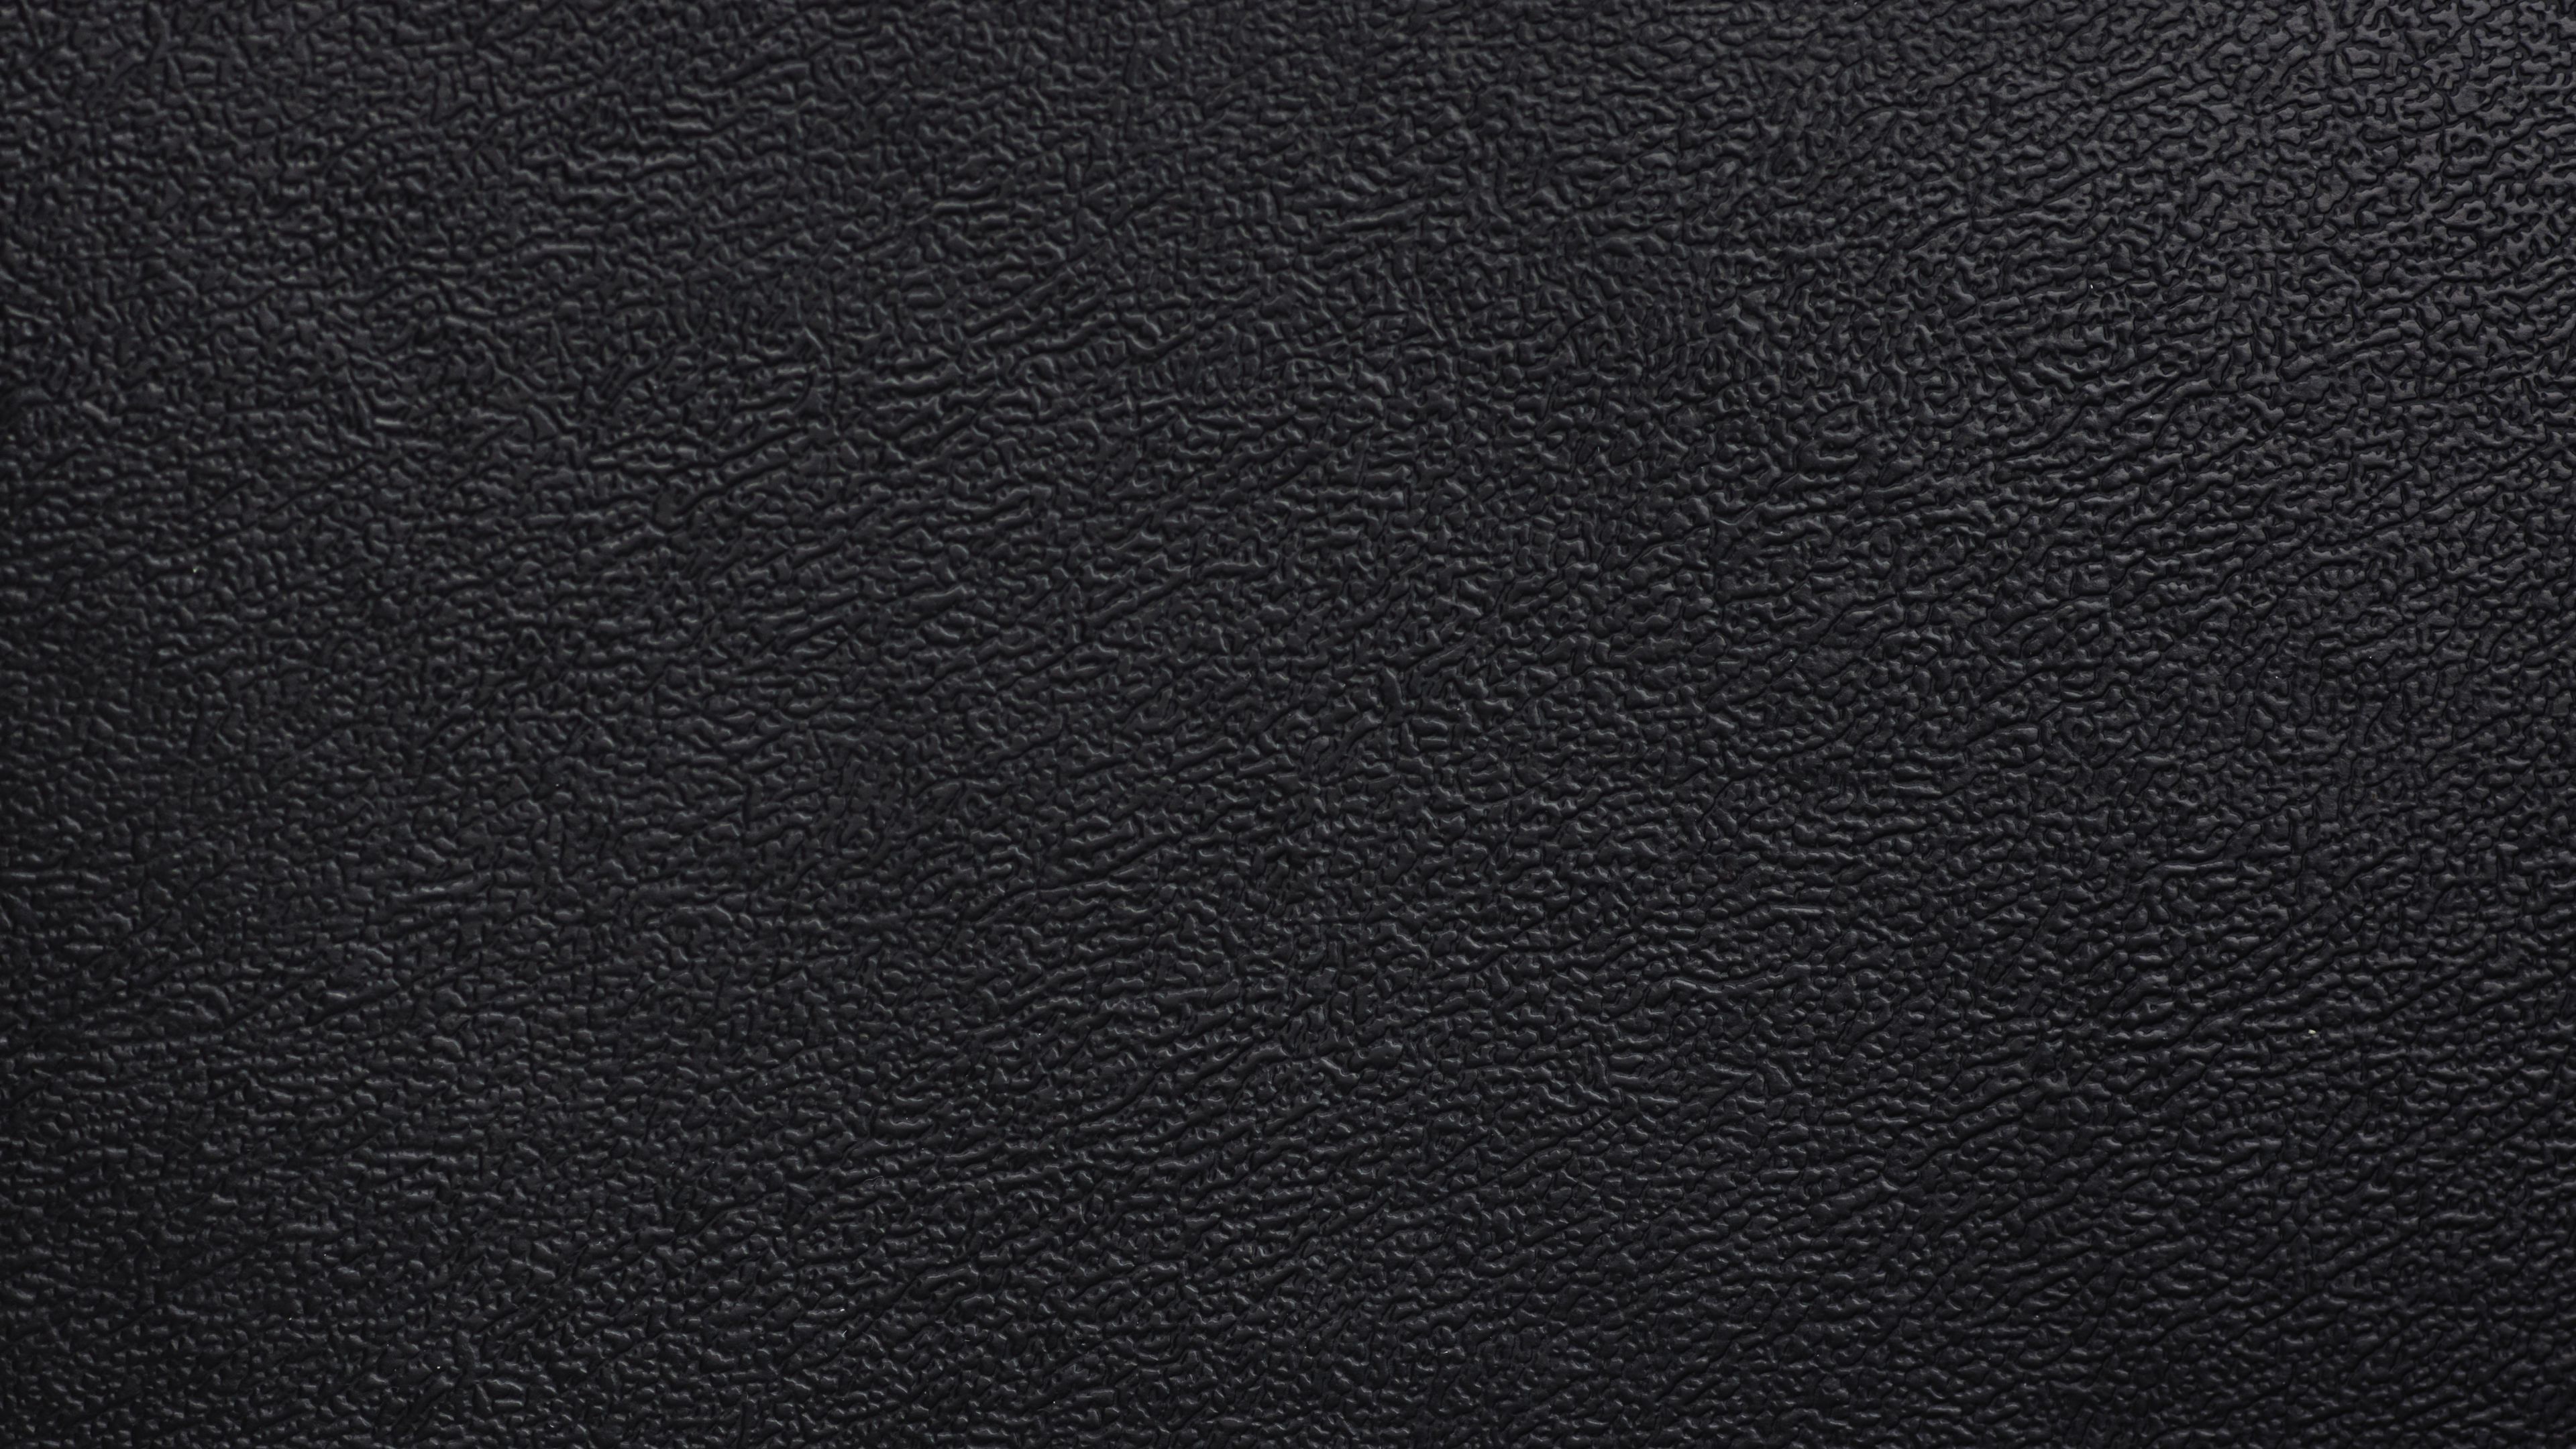 Download wallpaper 3840x2160 texture, leather, relief 4k uhd 16:9 hd  background